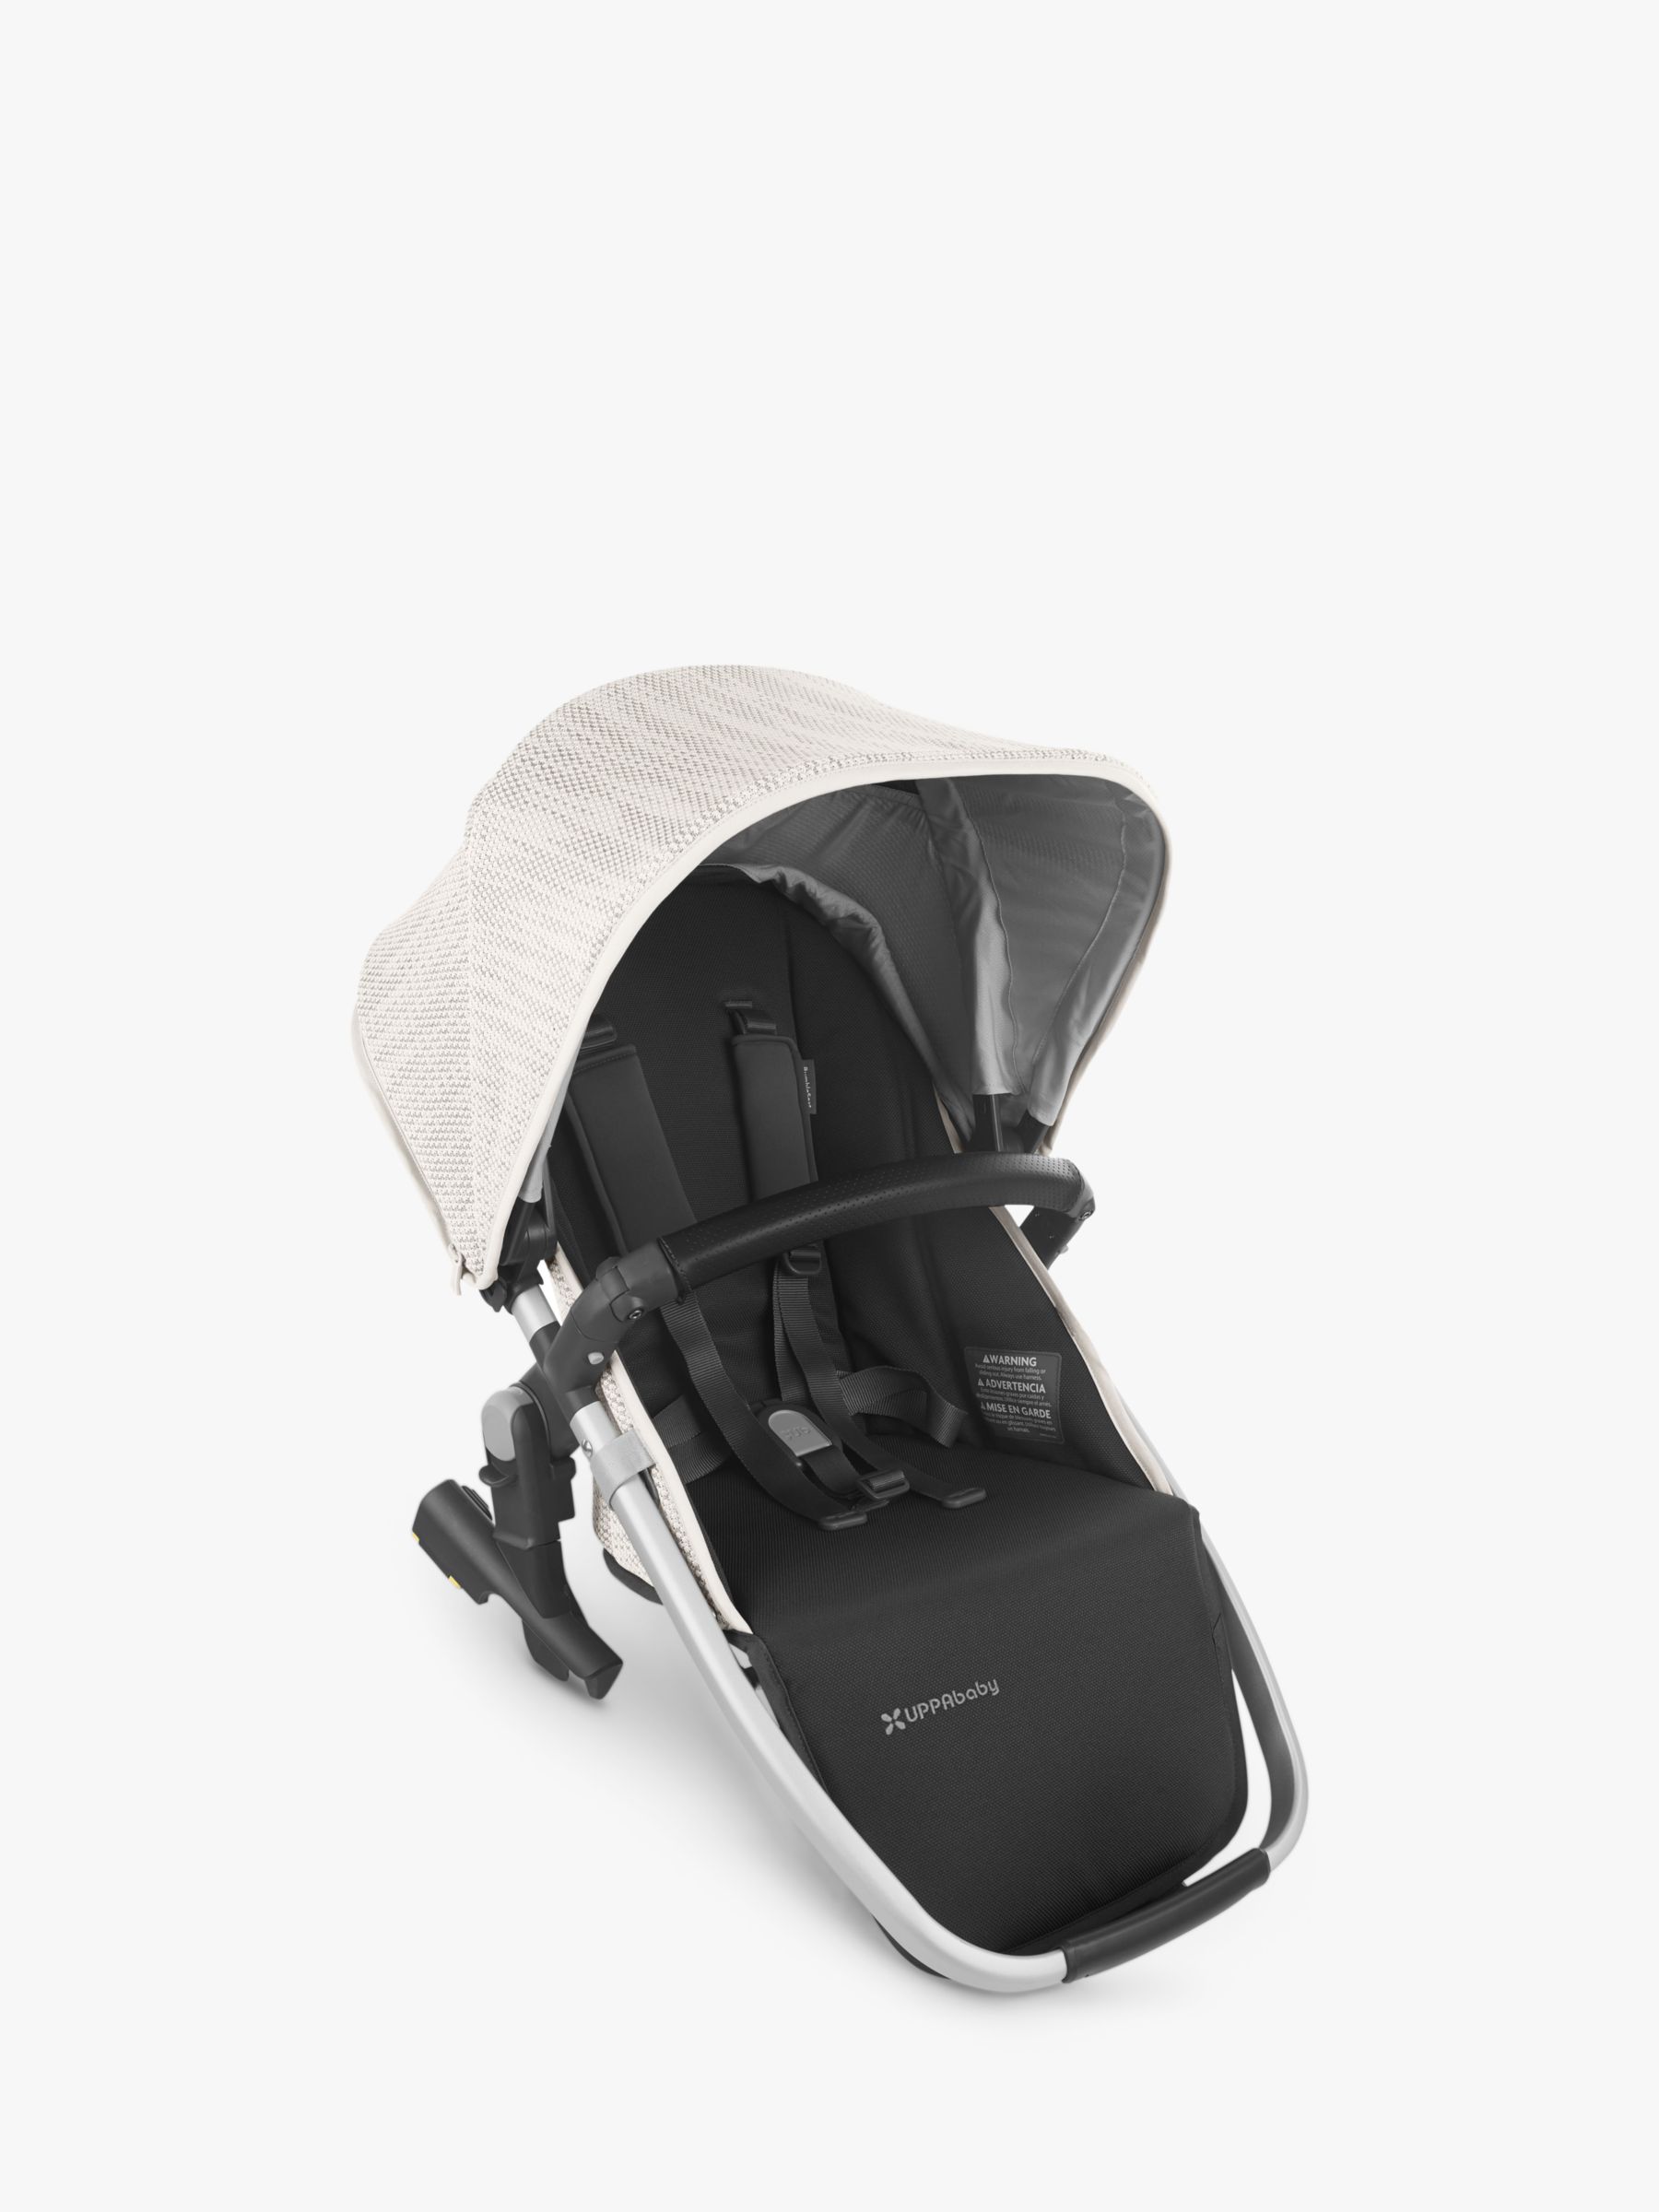 Image of UPPAbaby Rumble Seat Sierra